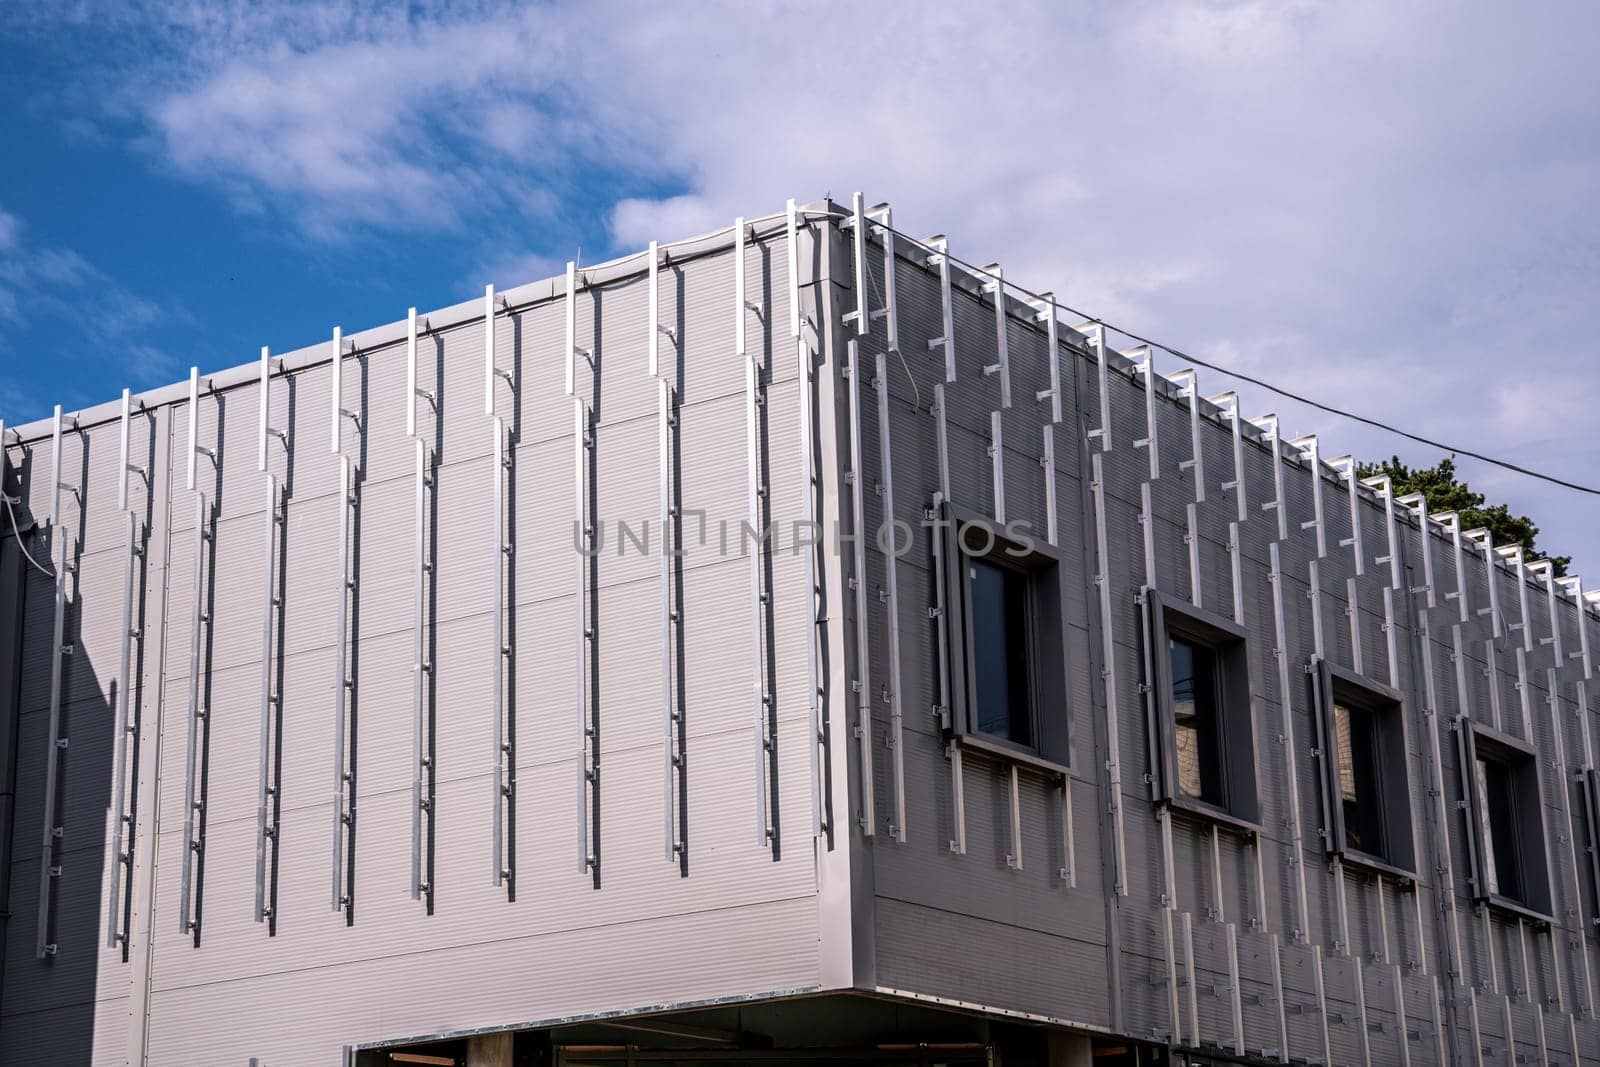 exterior walls of the building for cladding facades with decorative panels. crate on the facade of the building. Building house, installation of galvanized crate